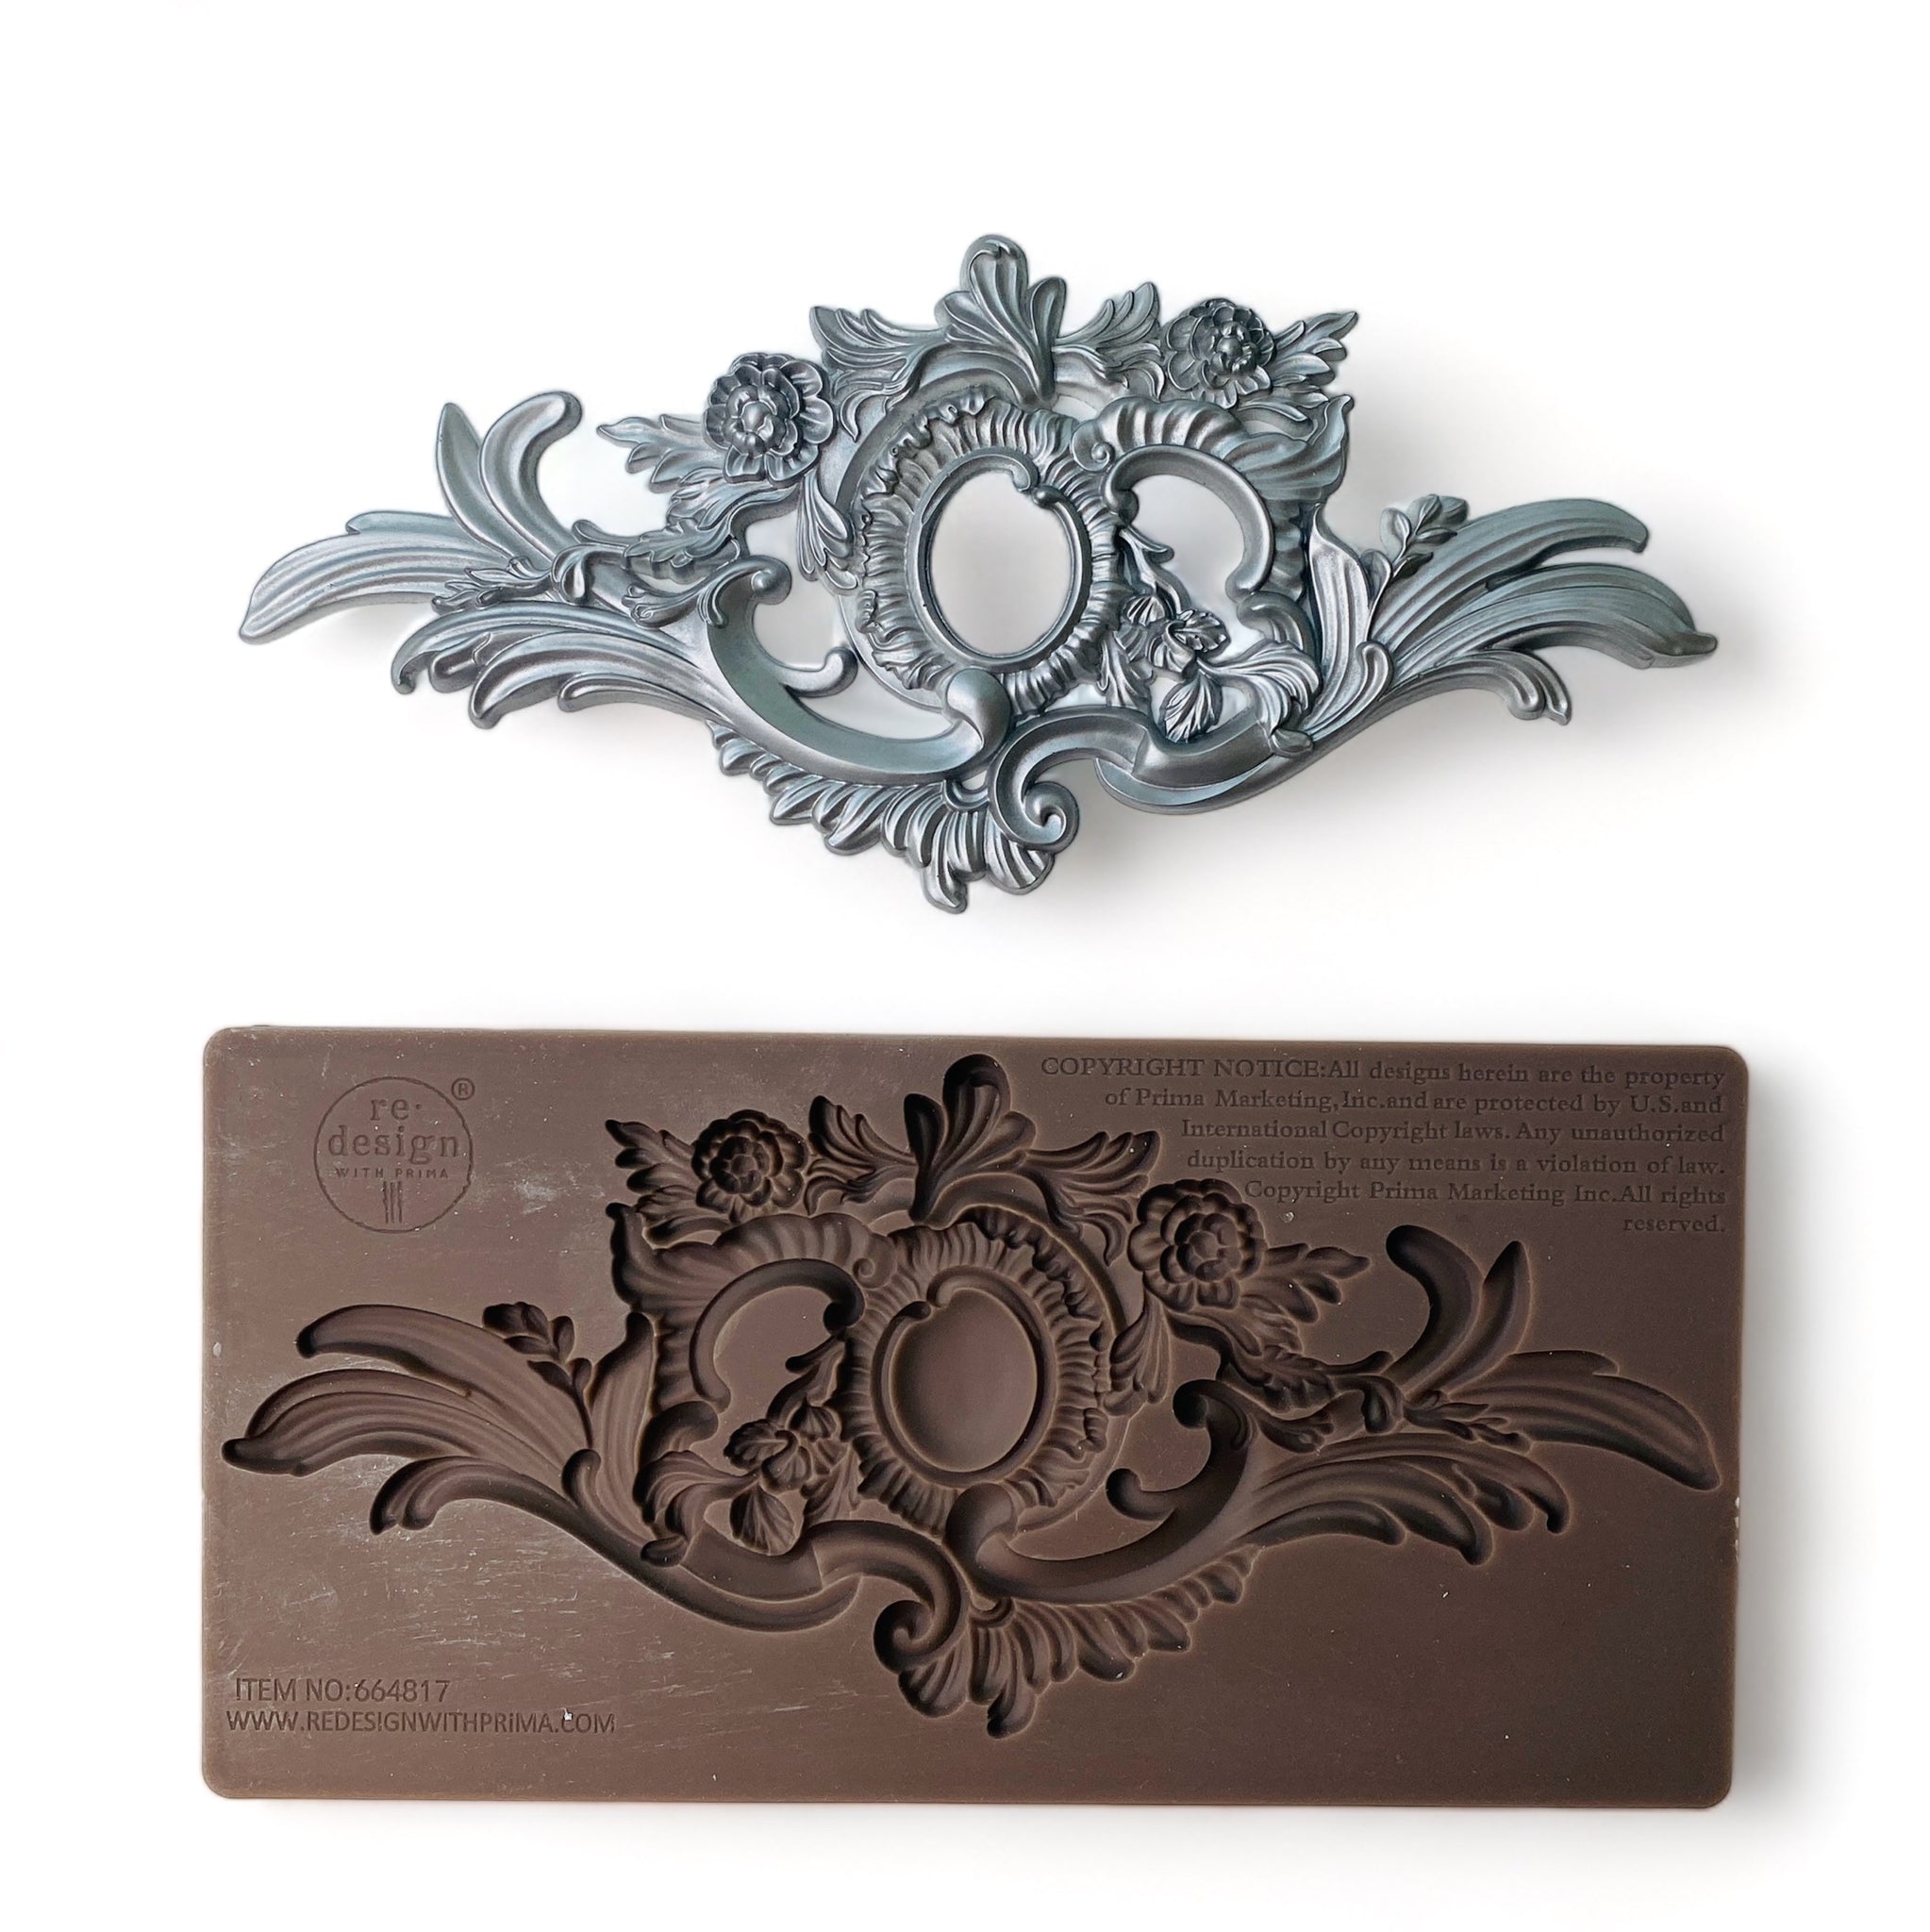 A brown silicone mold and silver colored casting that  features a unique ornate flourish and central medallion are against a white background.